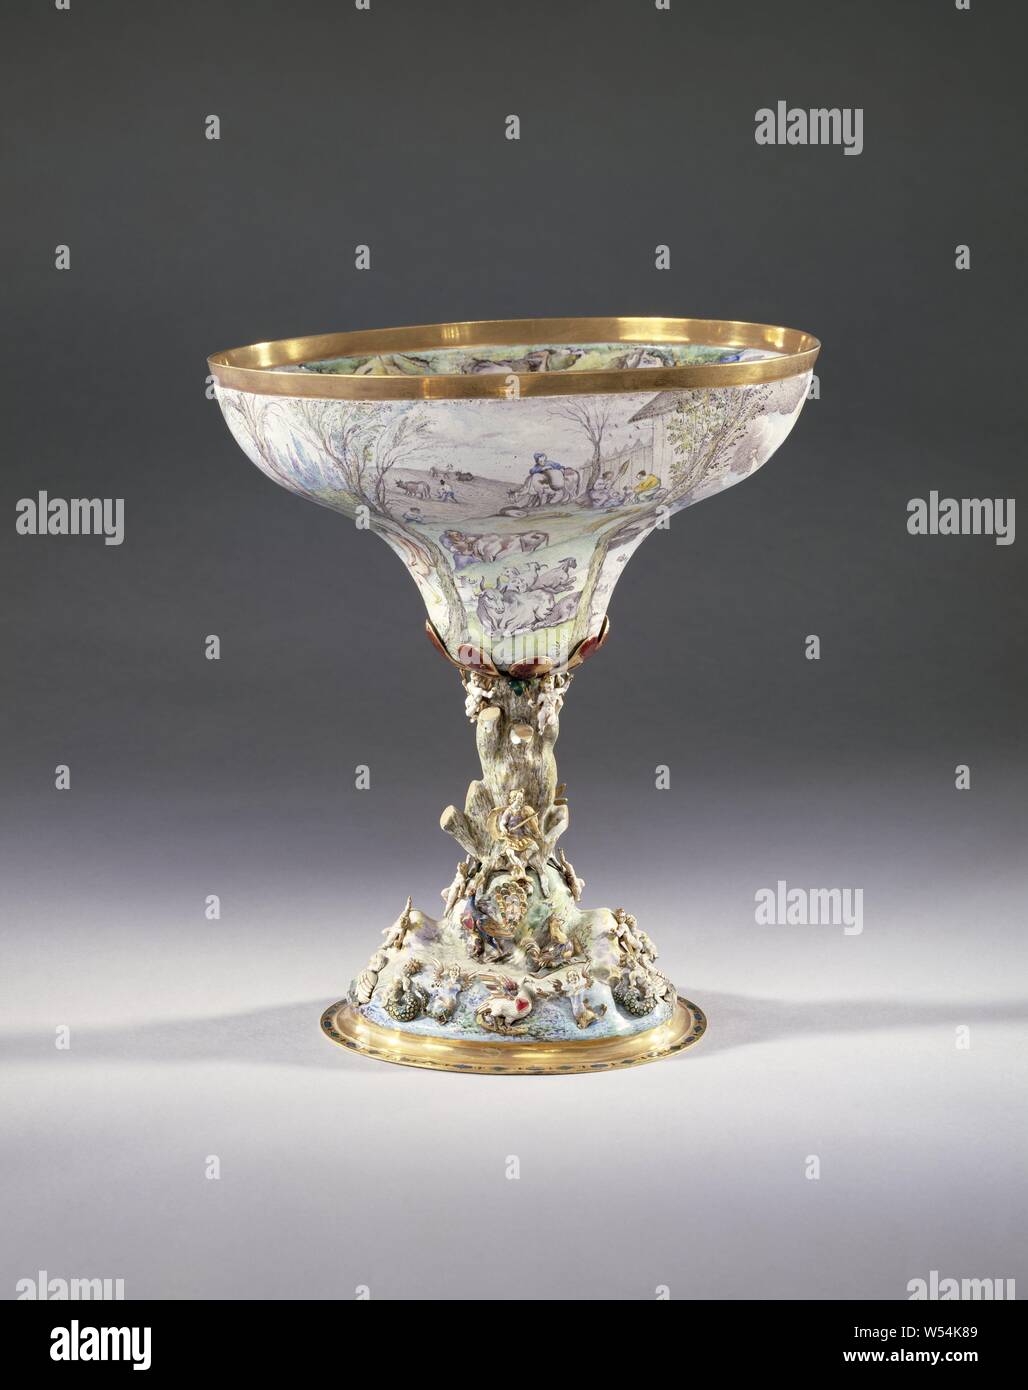 Cup Cup with representations from the Metamorphoses of Ovid, Cup of gold, completely enameled on a white background. The base of the cup, with a flat ring with diamond pattern, is shaped like a hill with a gnarled tree trunk at the top, which serves as the trunk of the cup. Enameled gold figures are attached to the foot completely covered with enamel. Orpheus sits against the tree trunk, playing on his viola. At his feet are amors, mermaids and many birds, including a peacock, a rooster, a parrot, two swans and two eagles. The top of the tree trunk is surrounded by amors and red enameled Stock Photo